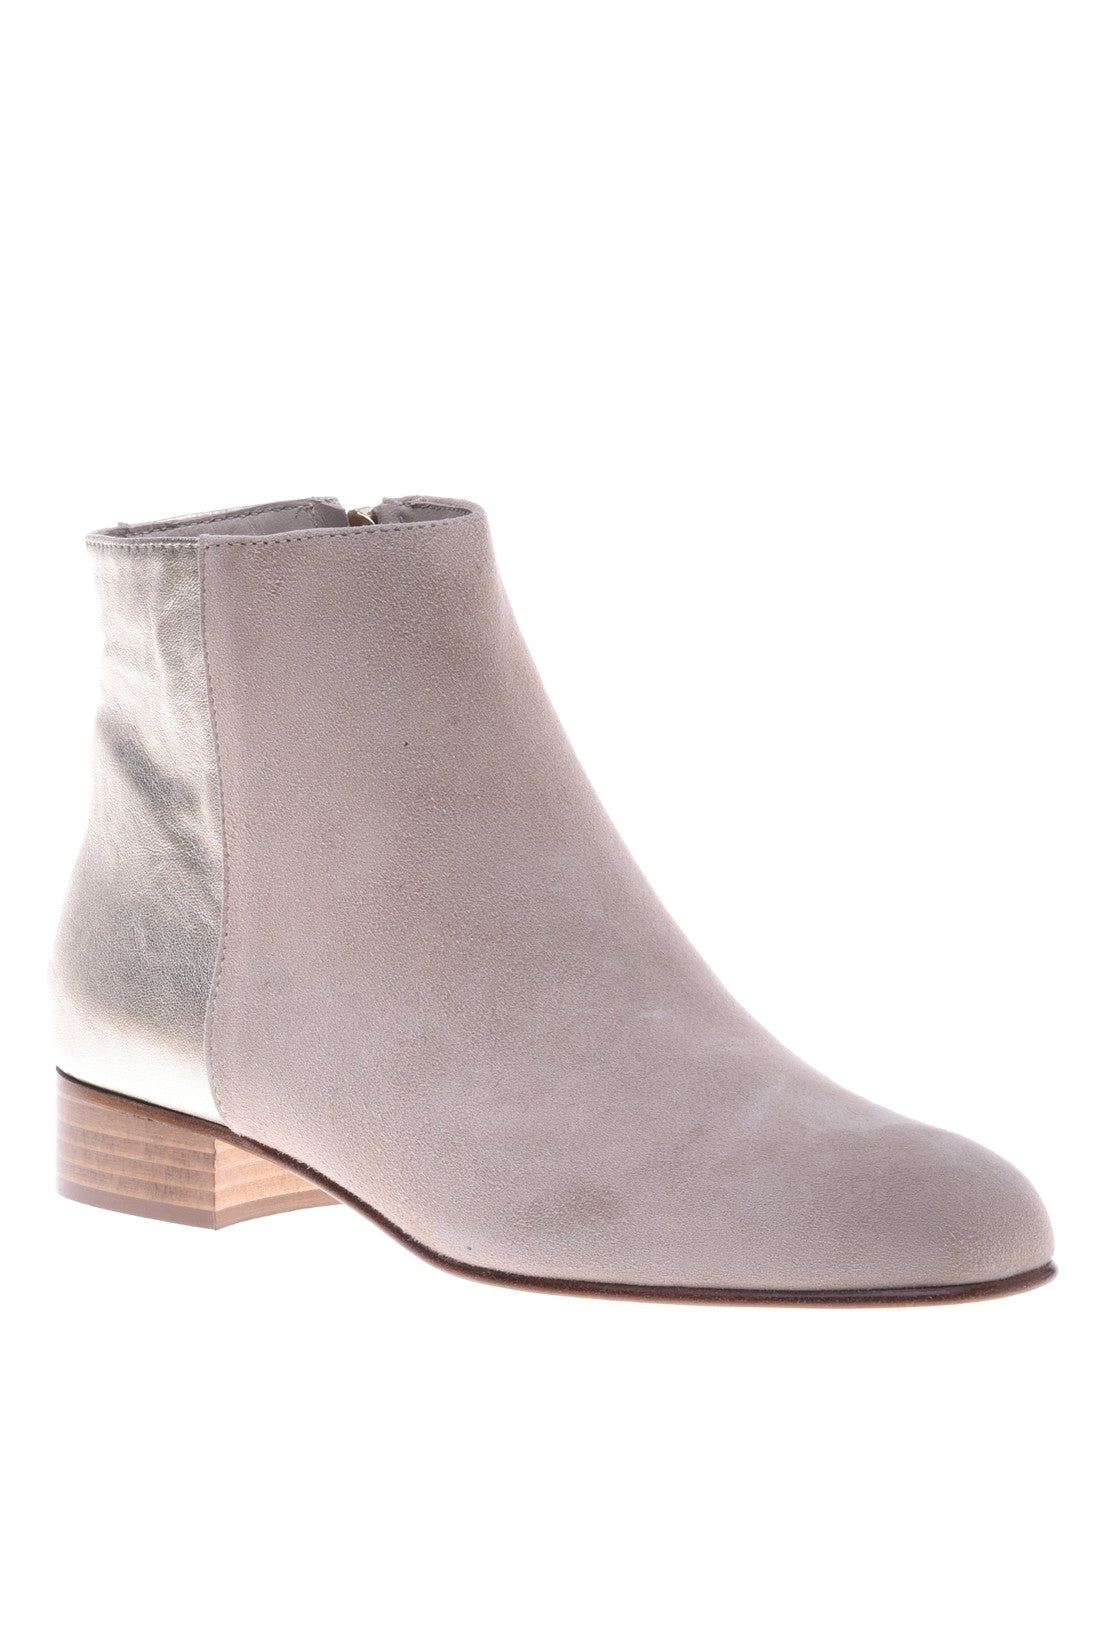 Ankle boot in taupe and platinum suede